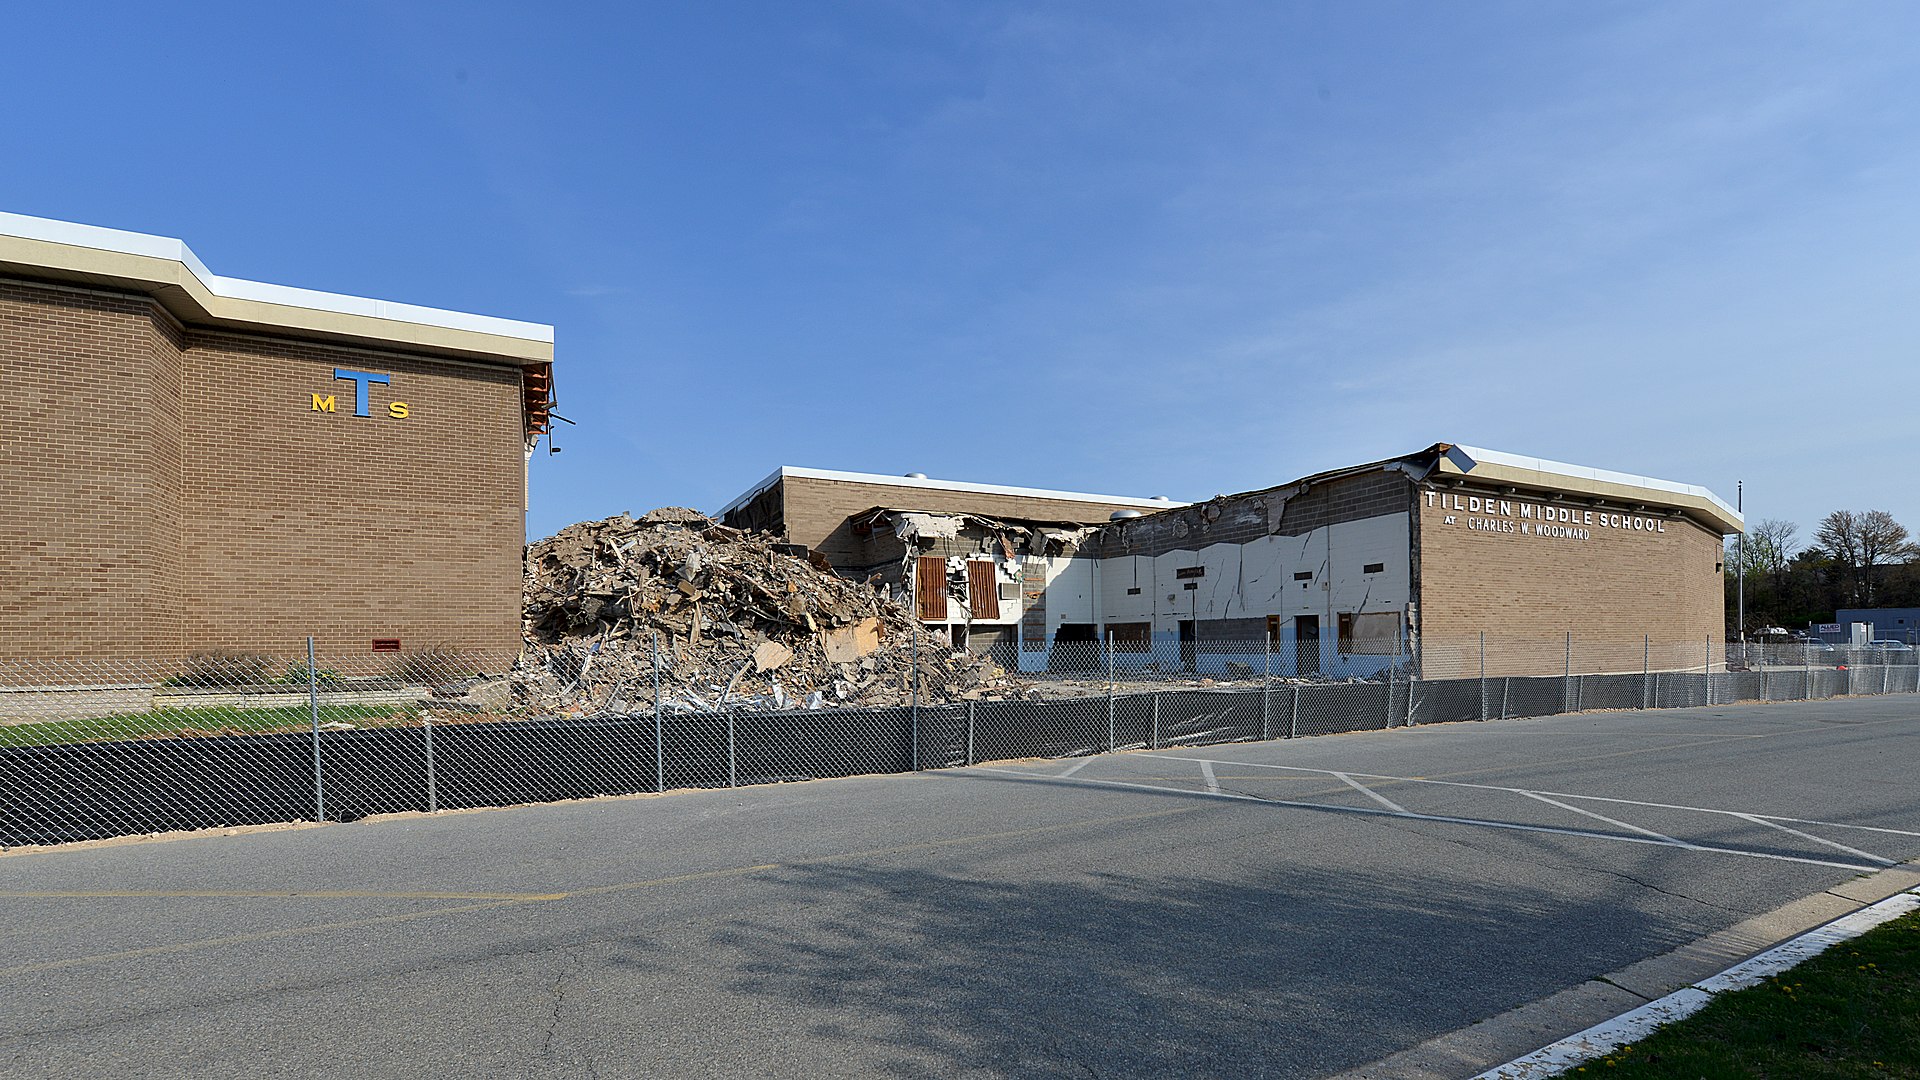 The demolition of Woodward High School begins in April 2021. Woodward is scheduled to open this fall as a holding school for Northwood High School. (Courtesy G. Edward Johnson via Wikimedia Commons)